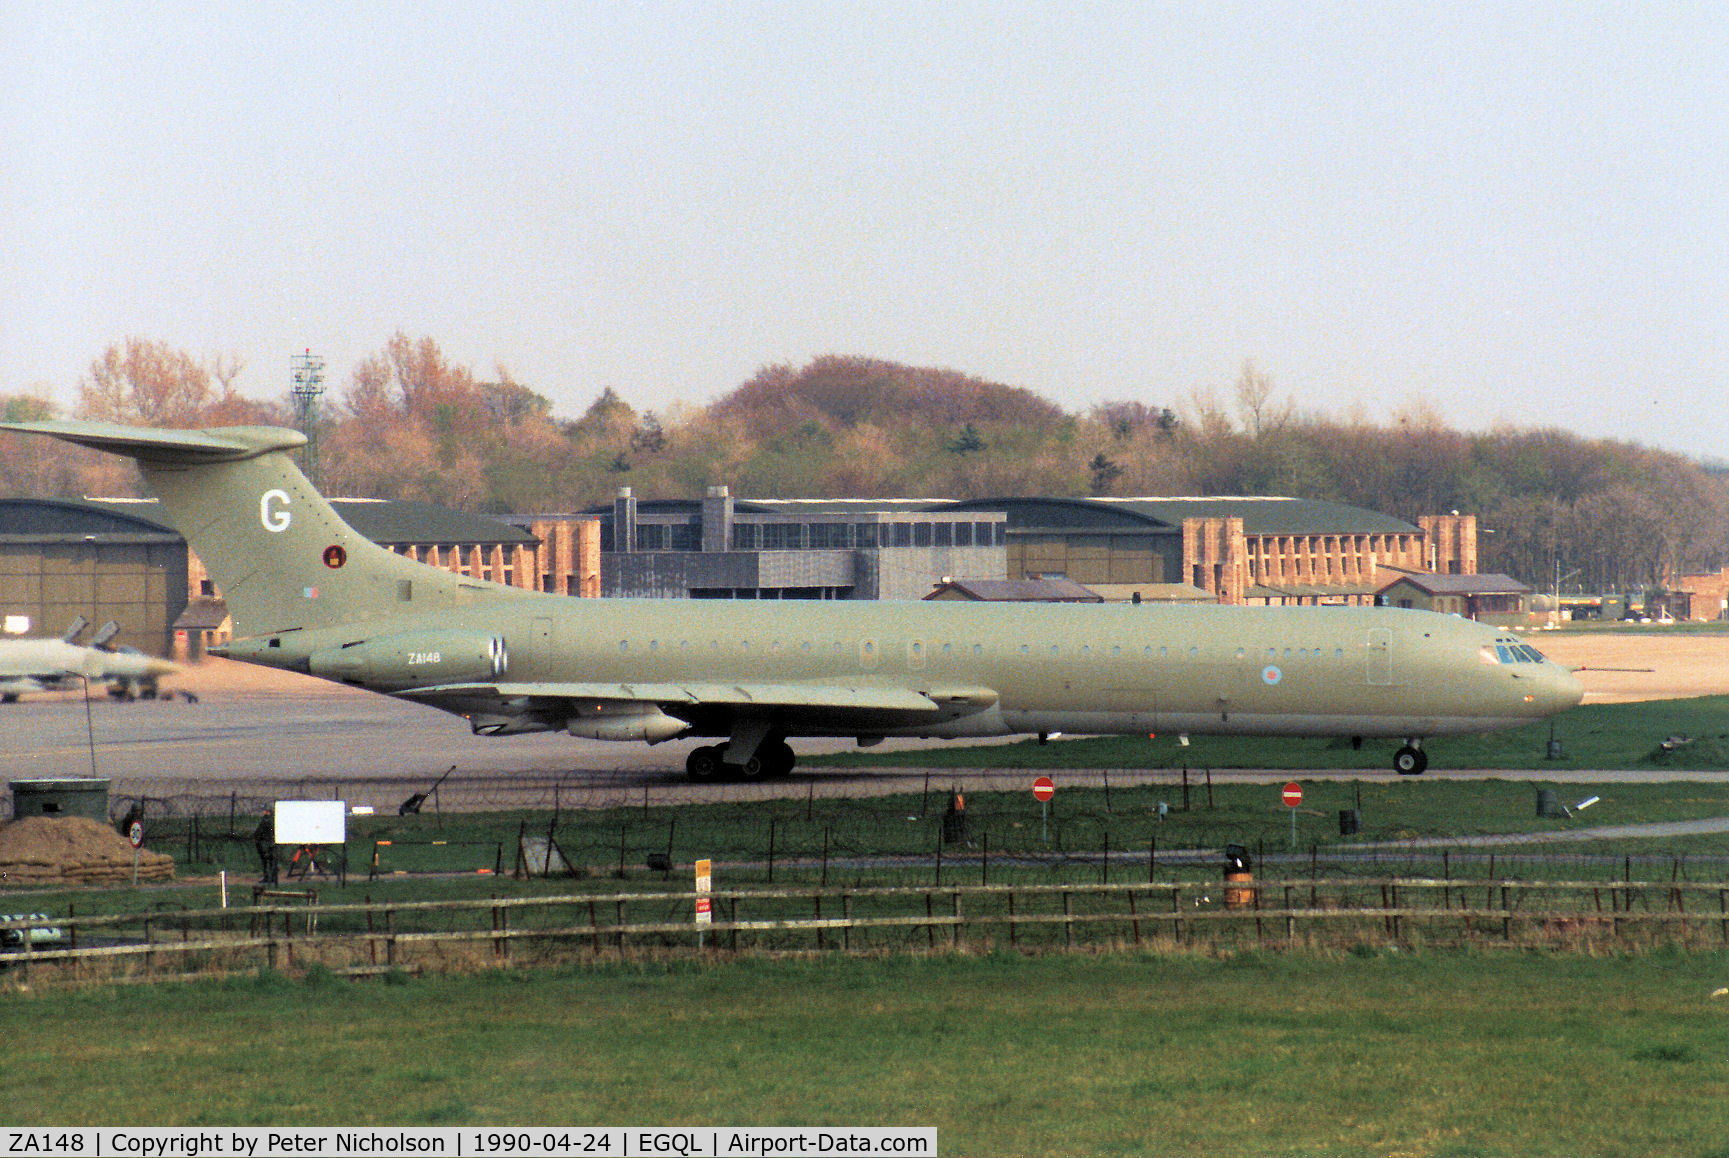 ZA148, 1967 Vickers VC10 K.3 C/N 883, VC-10 K.3 of 101 Squadron taxying to the active runway at RAF Leuchars in April 1990.